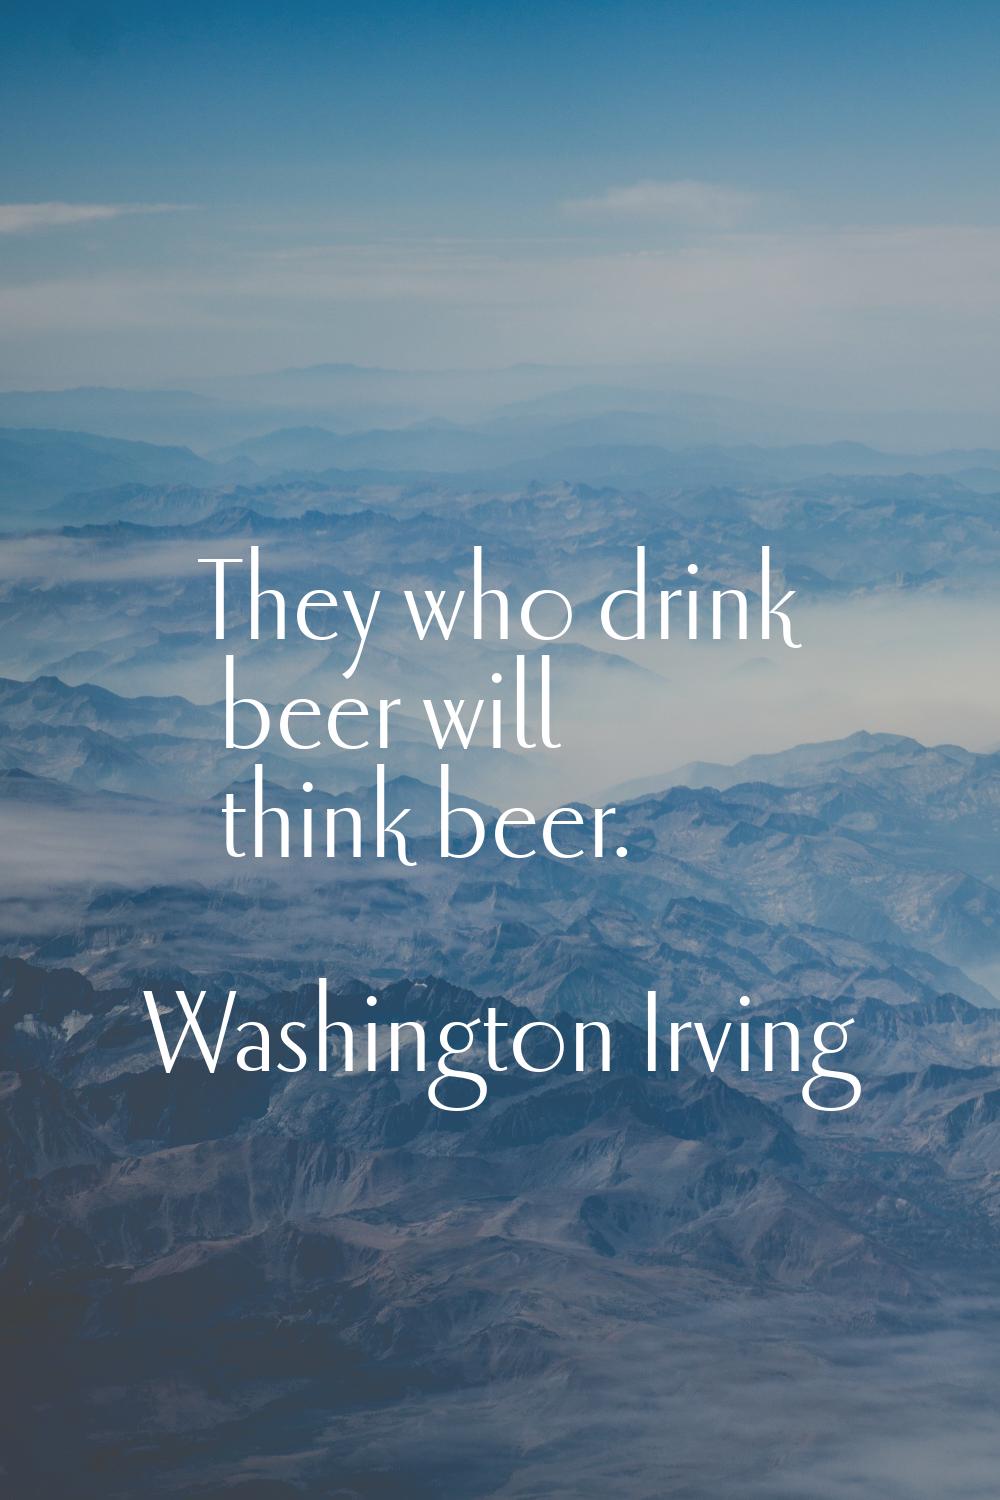 They who drink beer will think beer.